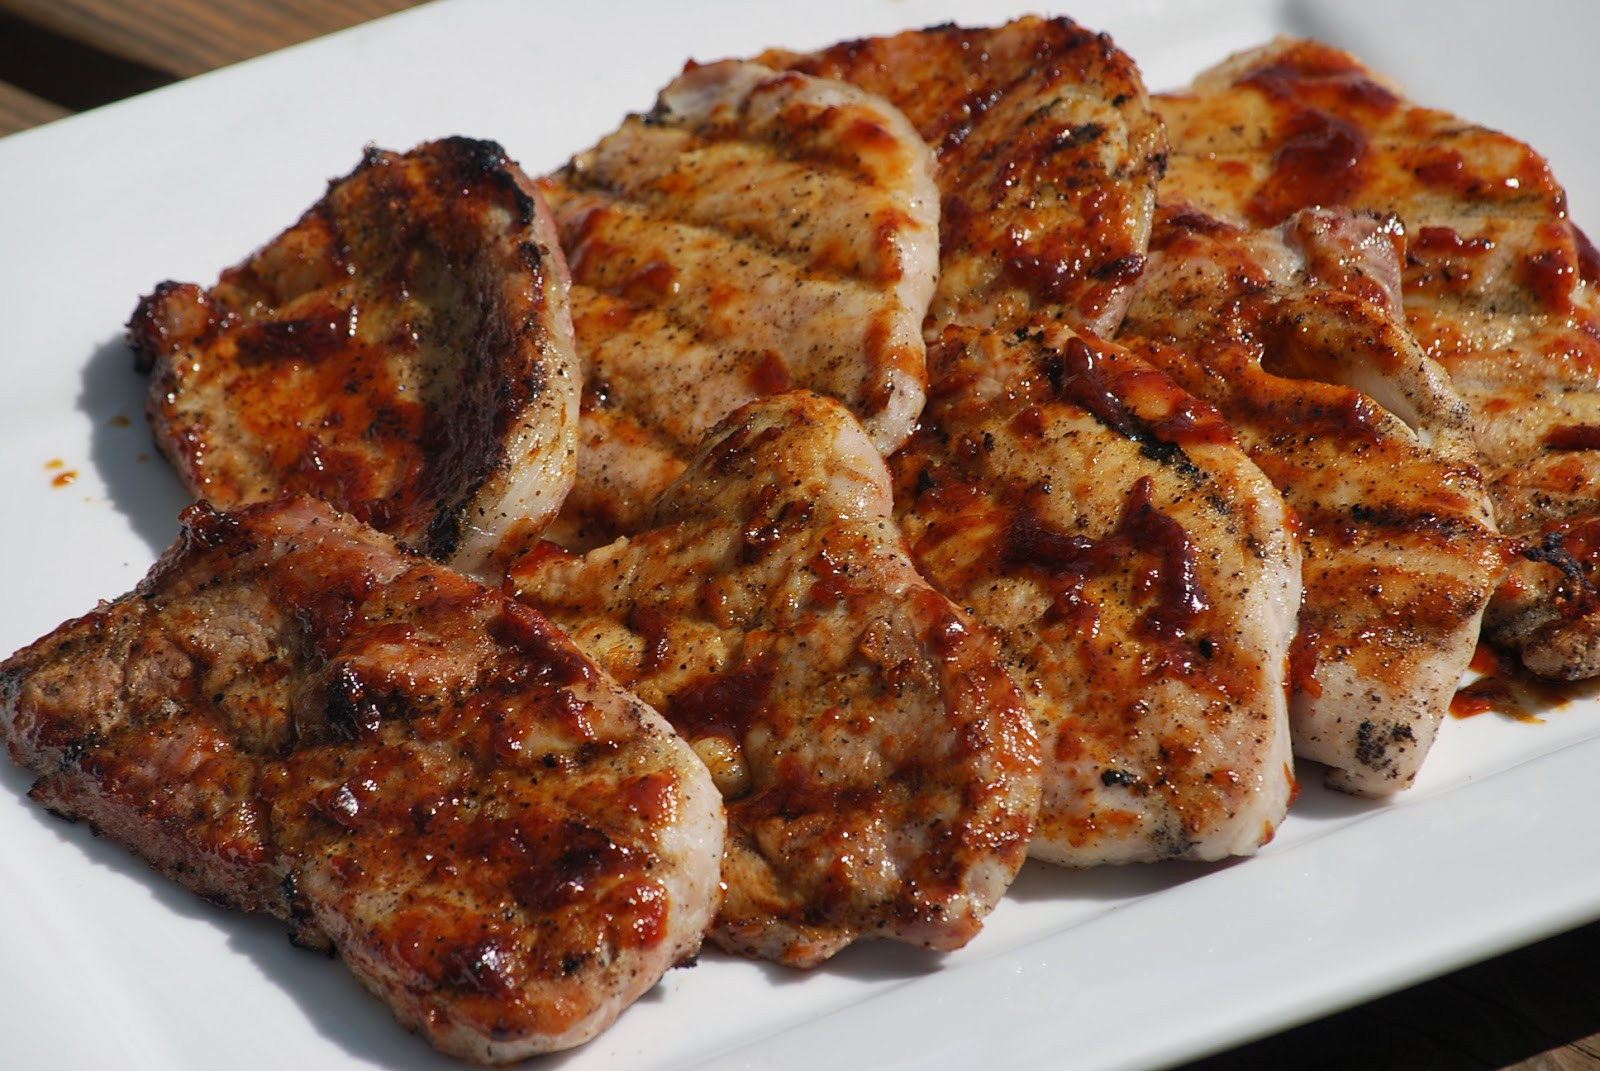 Recipes For Grilled Pork Chops
 My story in recipes Grilled Pork Chops